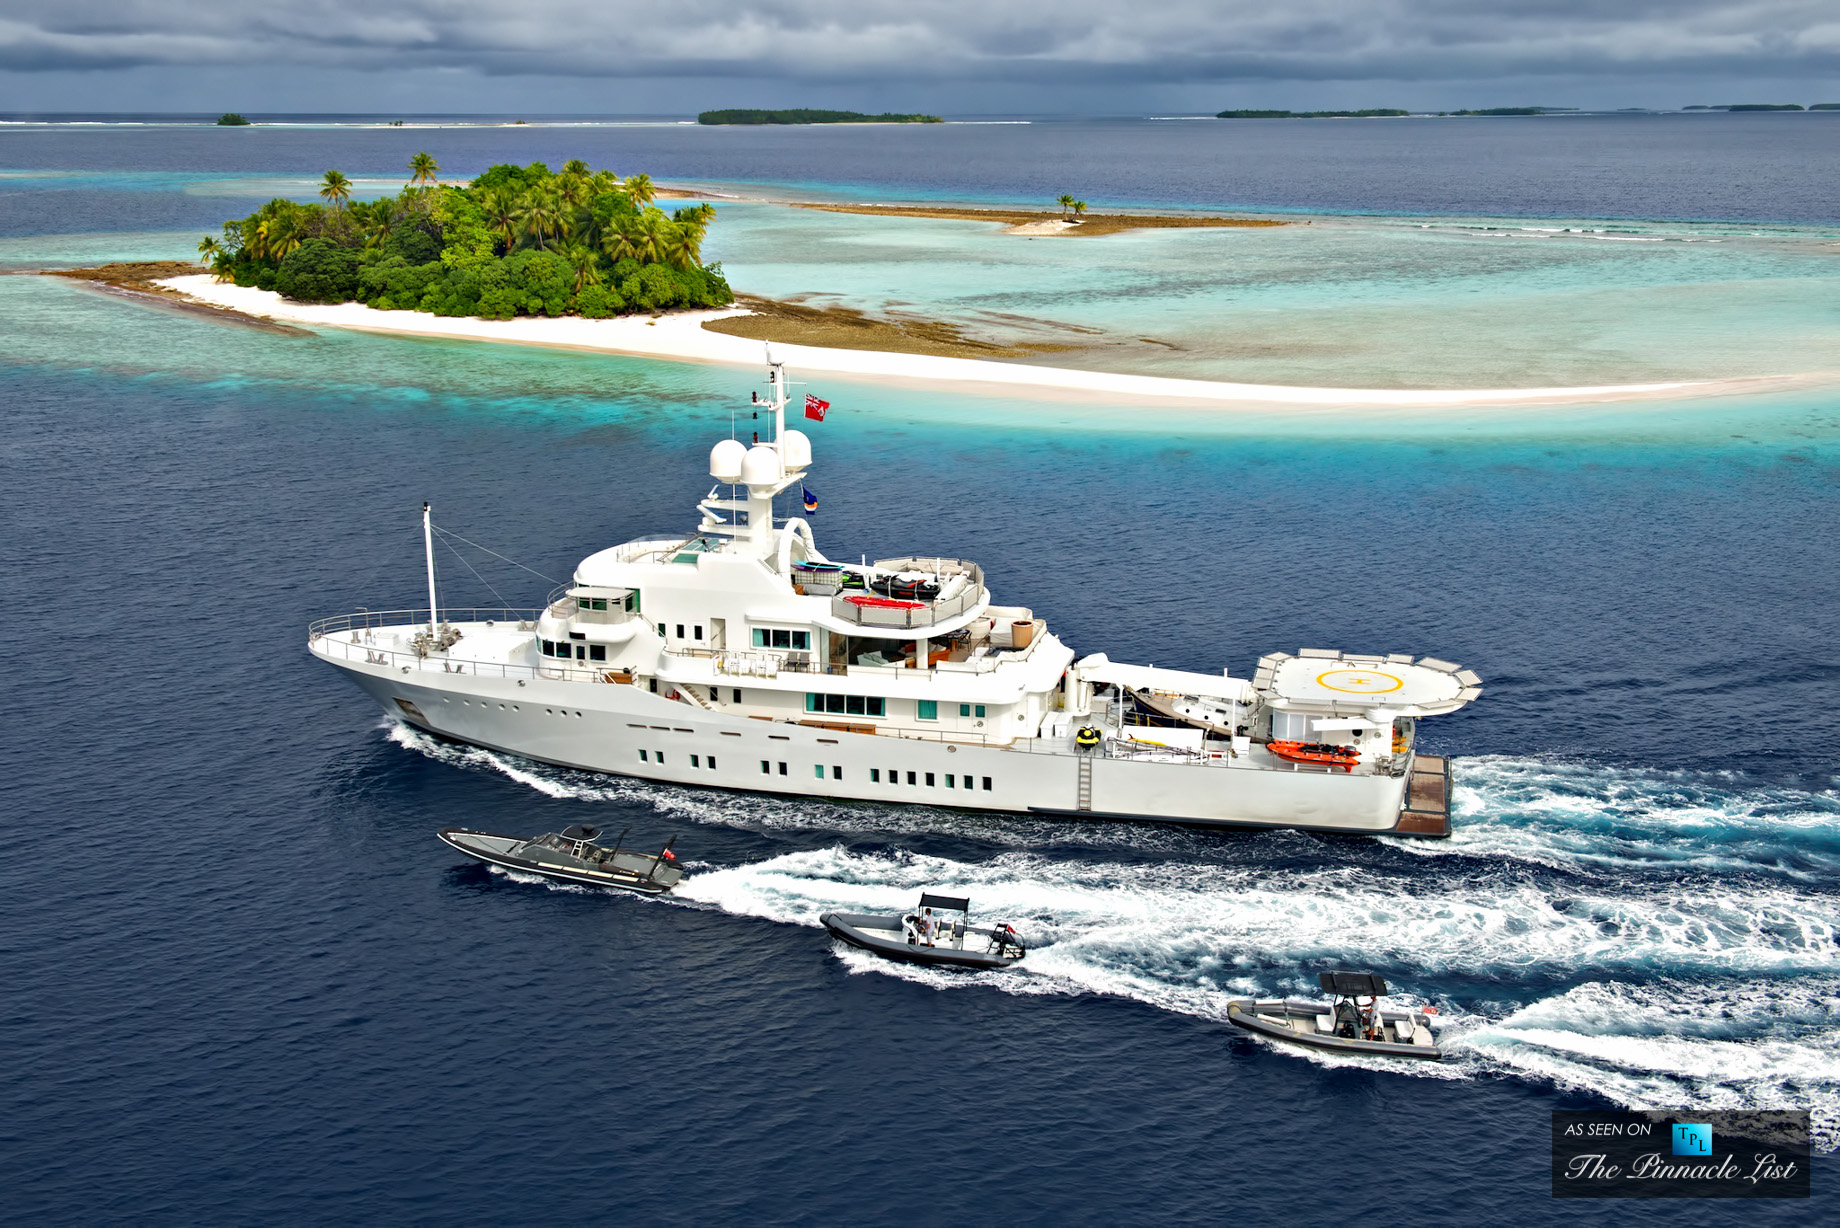 Senses Superyacht - Charter Availability for Caribbean and South Pacific